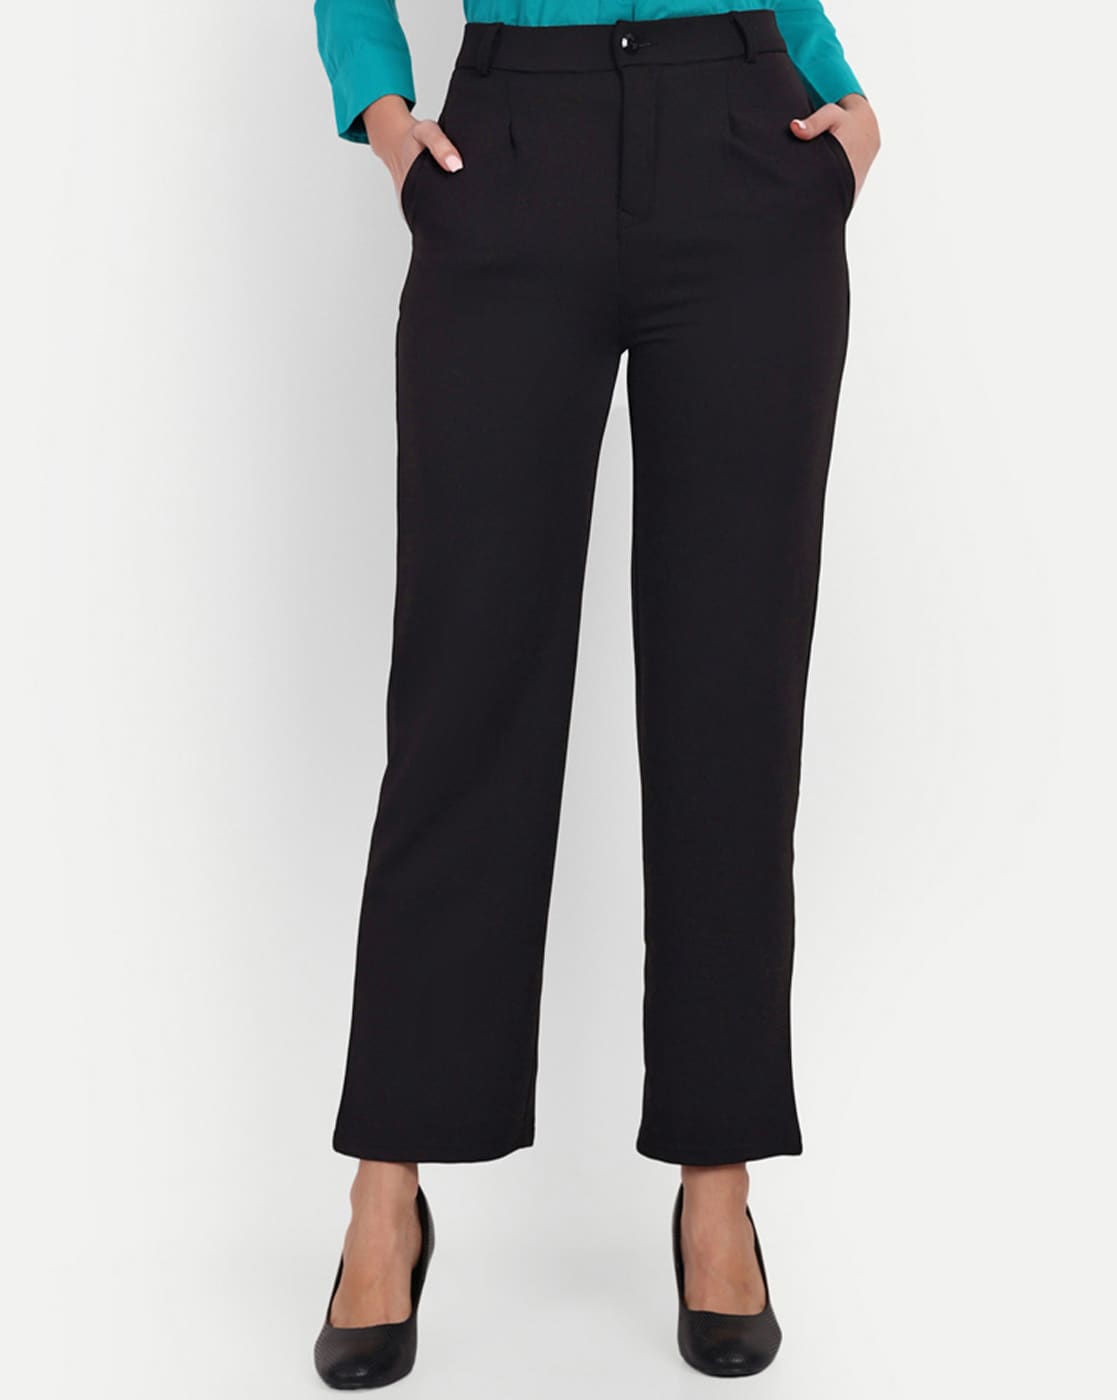 Buy V-GIRL Women Polyester Blend Solid Trousers (28) Black at Amazon.in